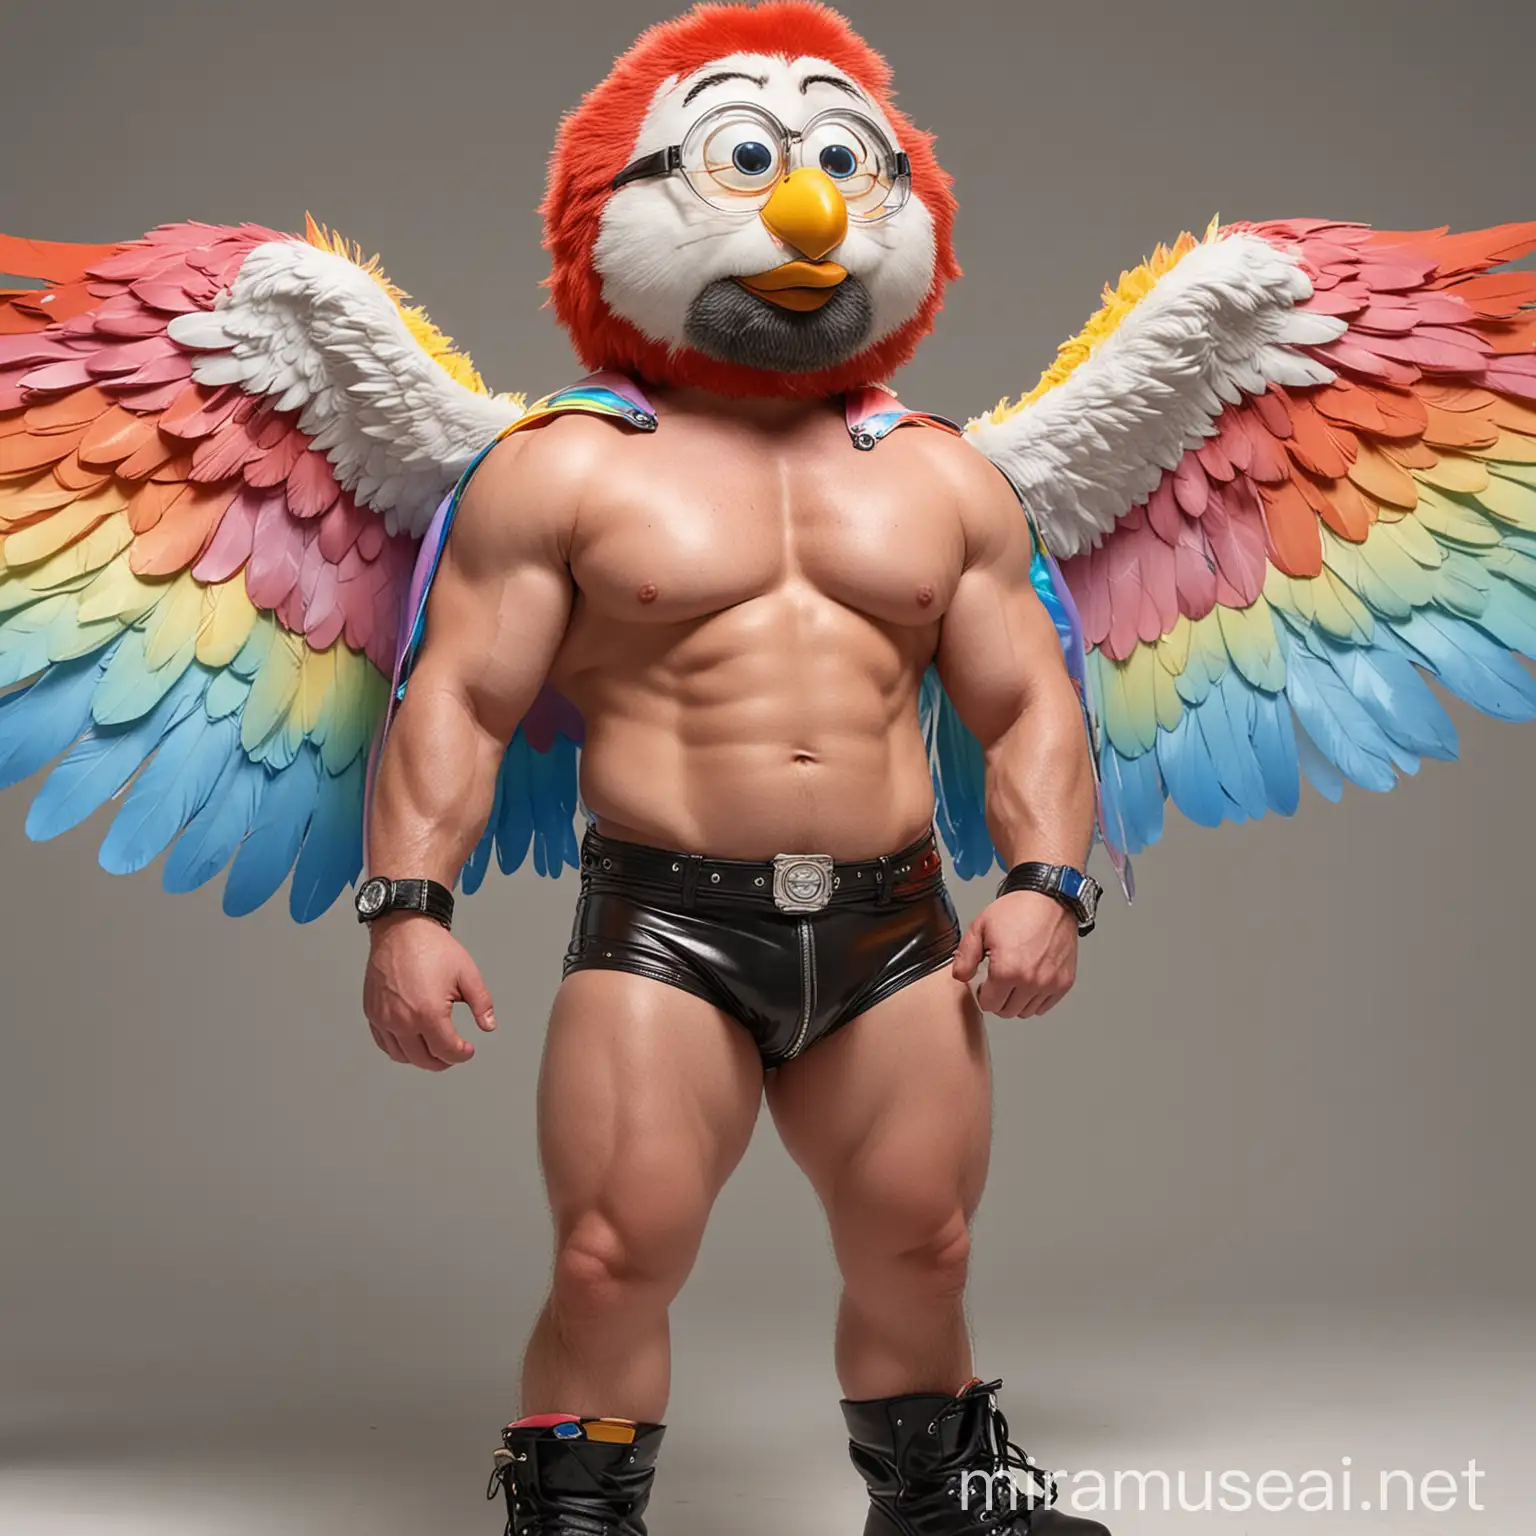 Studio Light Subtle Smile Topless 40s Ultra beefy Red Head Bodybuilder Daddy Big Eyes with Beard Wearing Multi-Highlighter Bright Rainbow Colored See Through huge Eagle Wings Shoulder Jacket short shorts long legs low leather boots and Flexing his Big Strong Arm Up with Doraemon Goggles on forehead